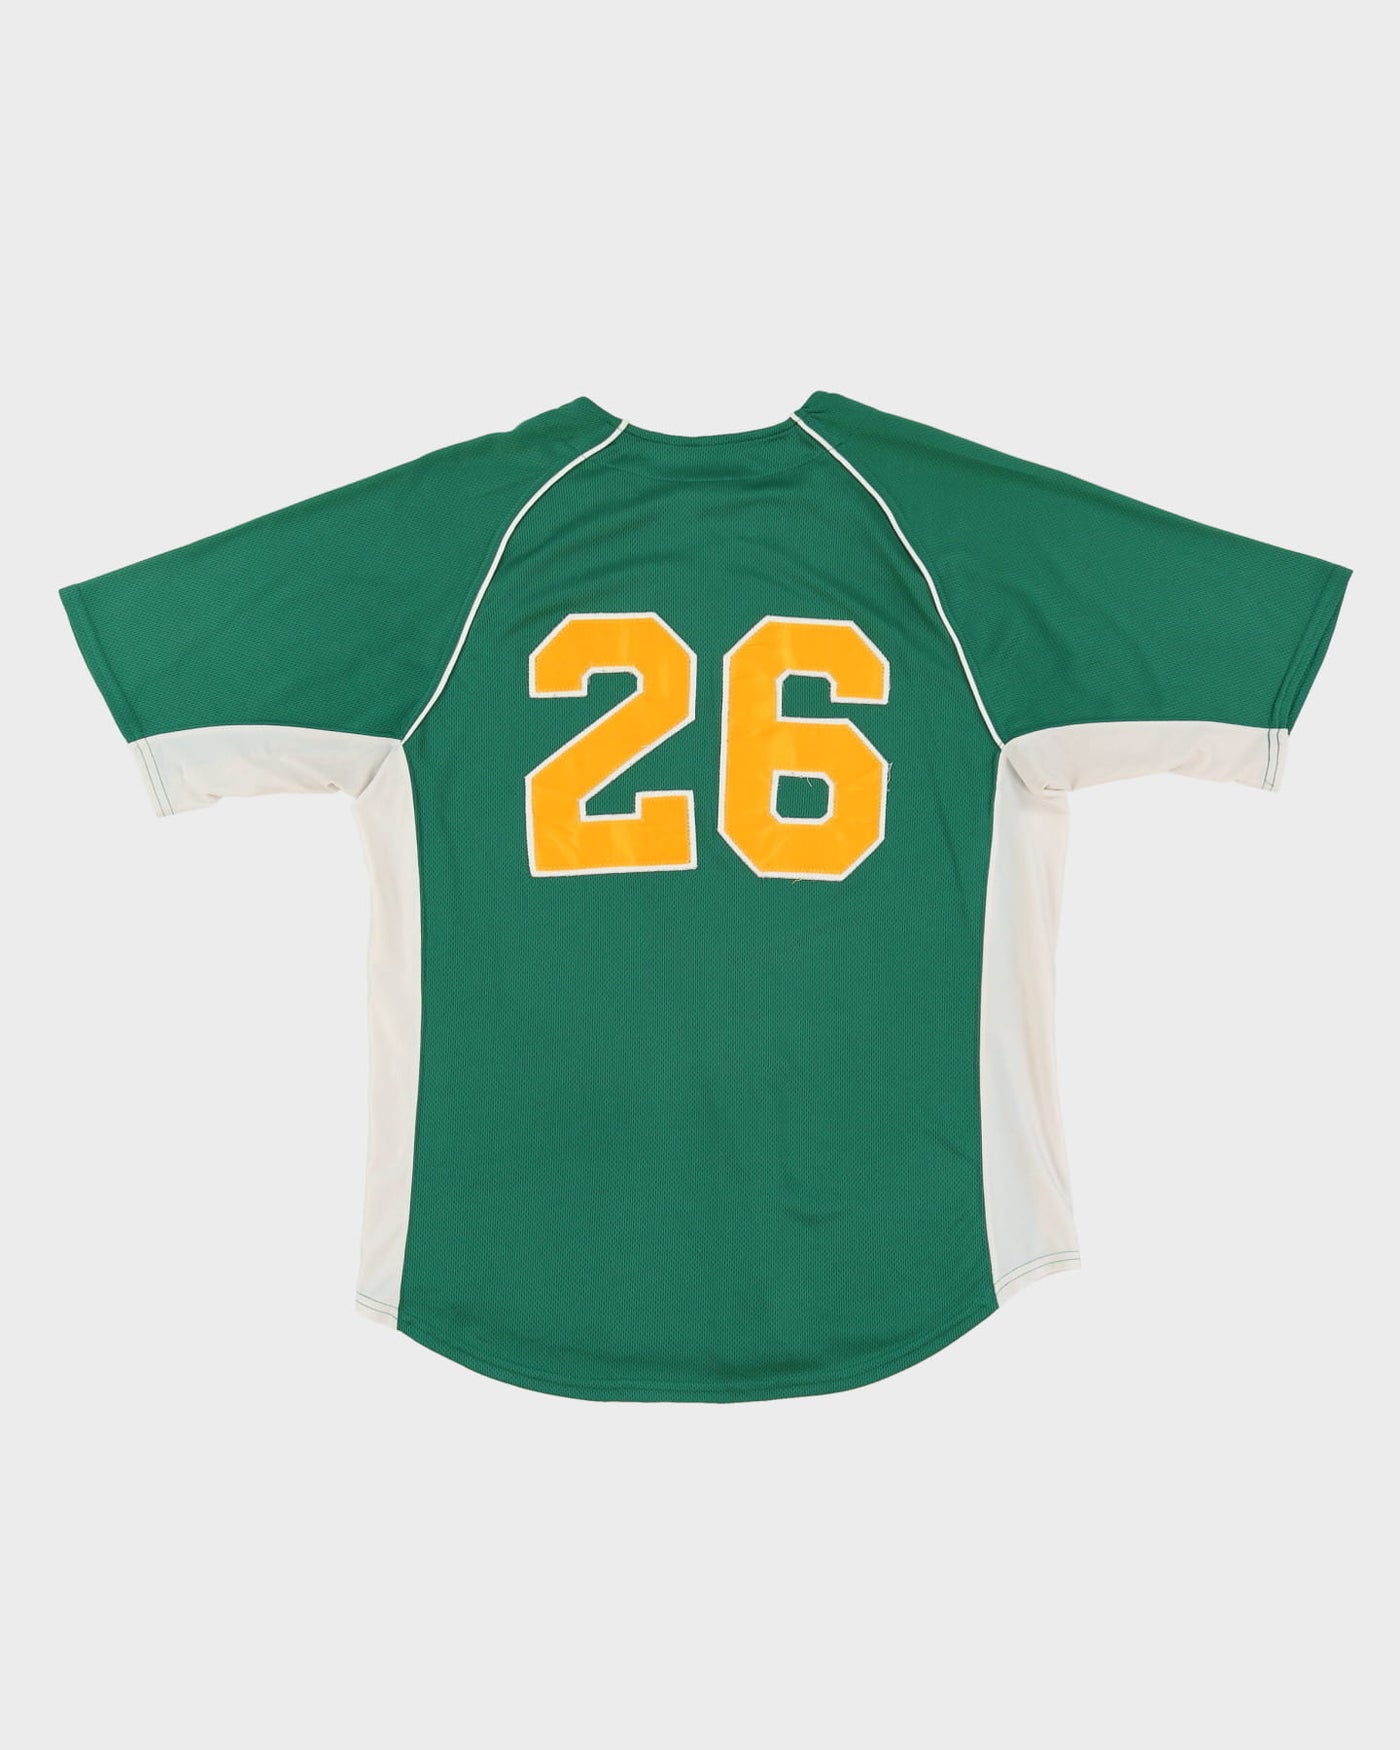 Green Athletics Embroidered Baseball Jersey - L